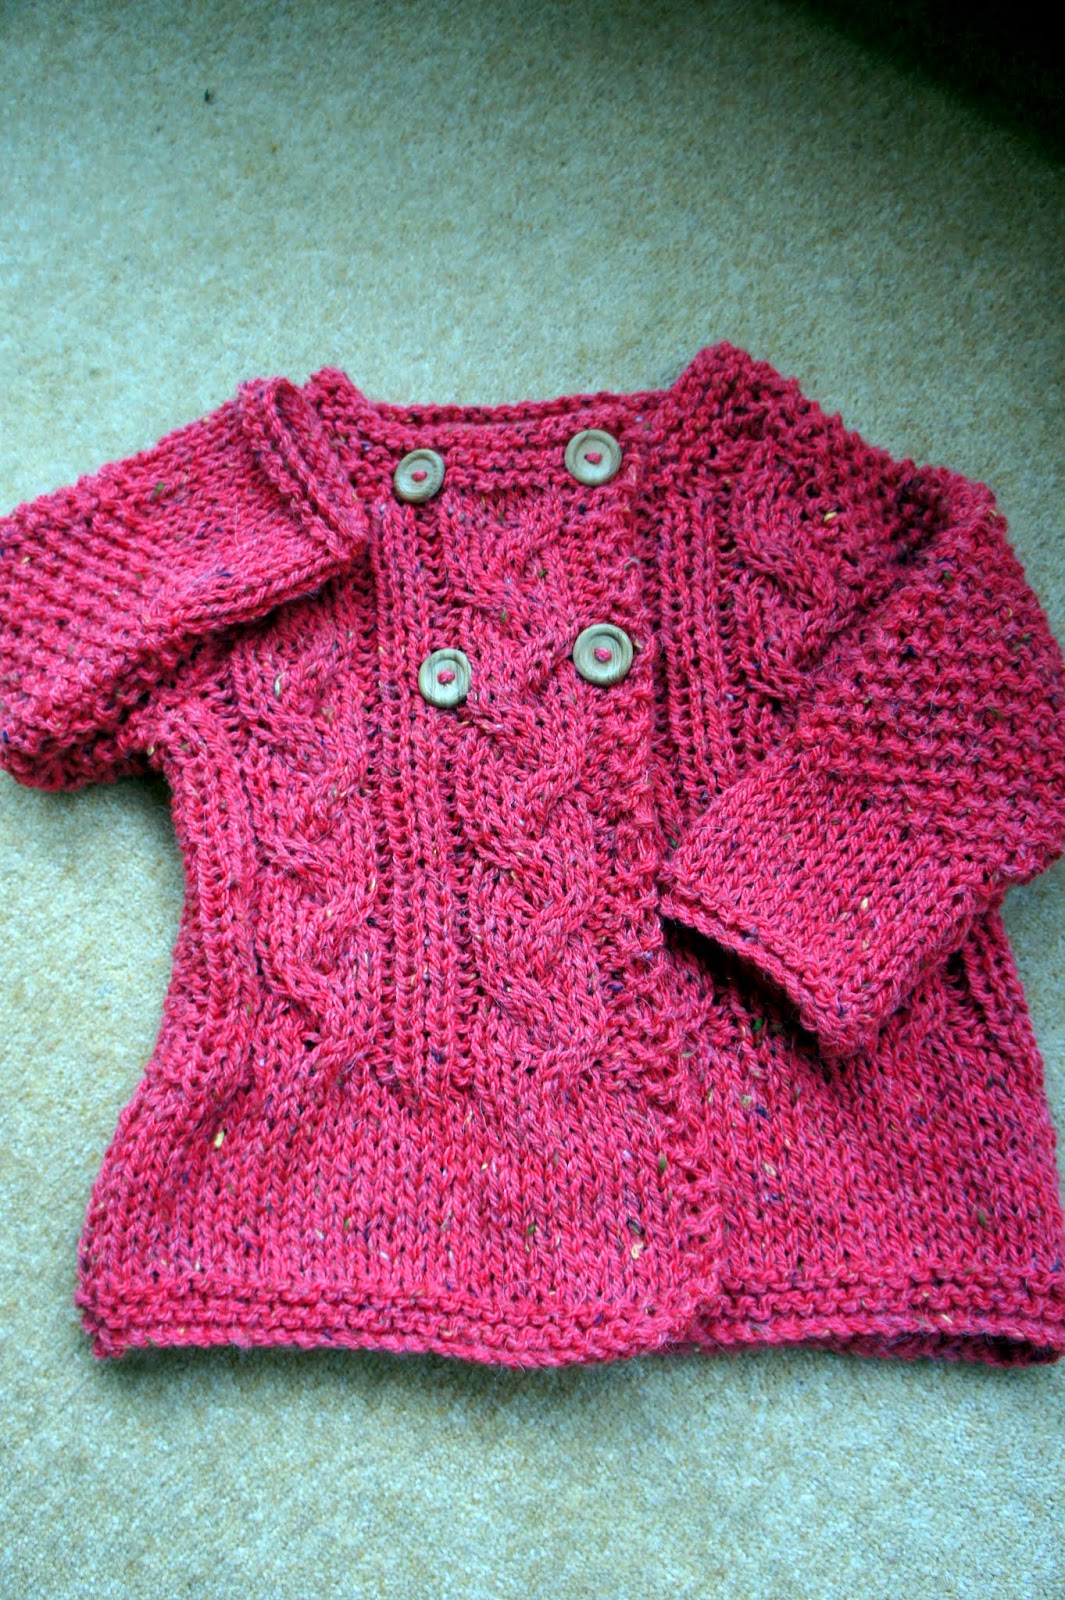 GRANNY'S WORLD: Knitting Projects